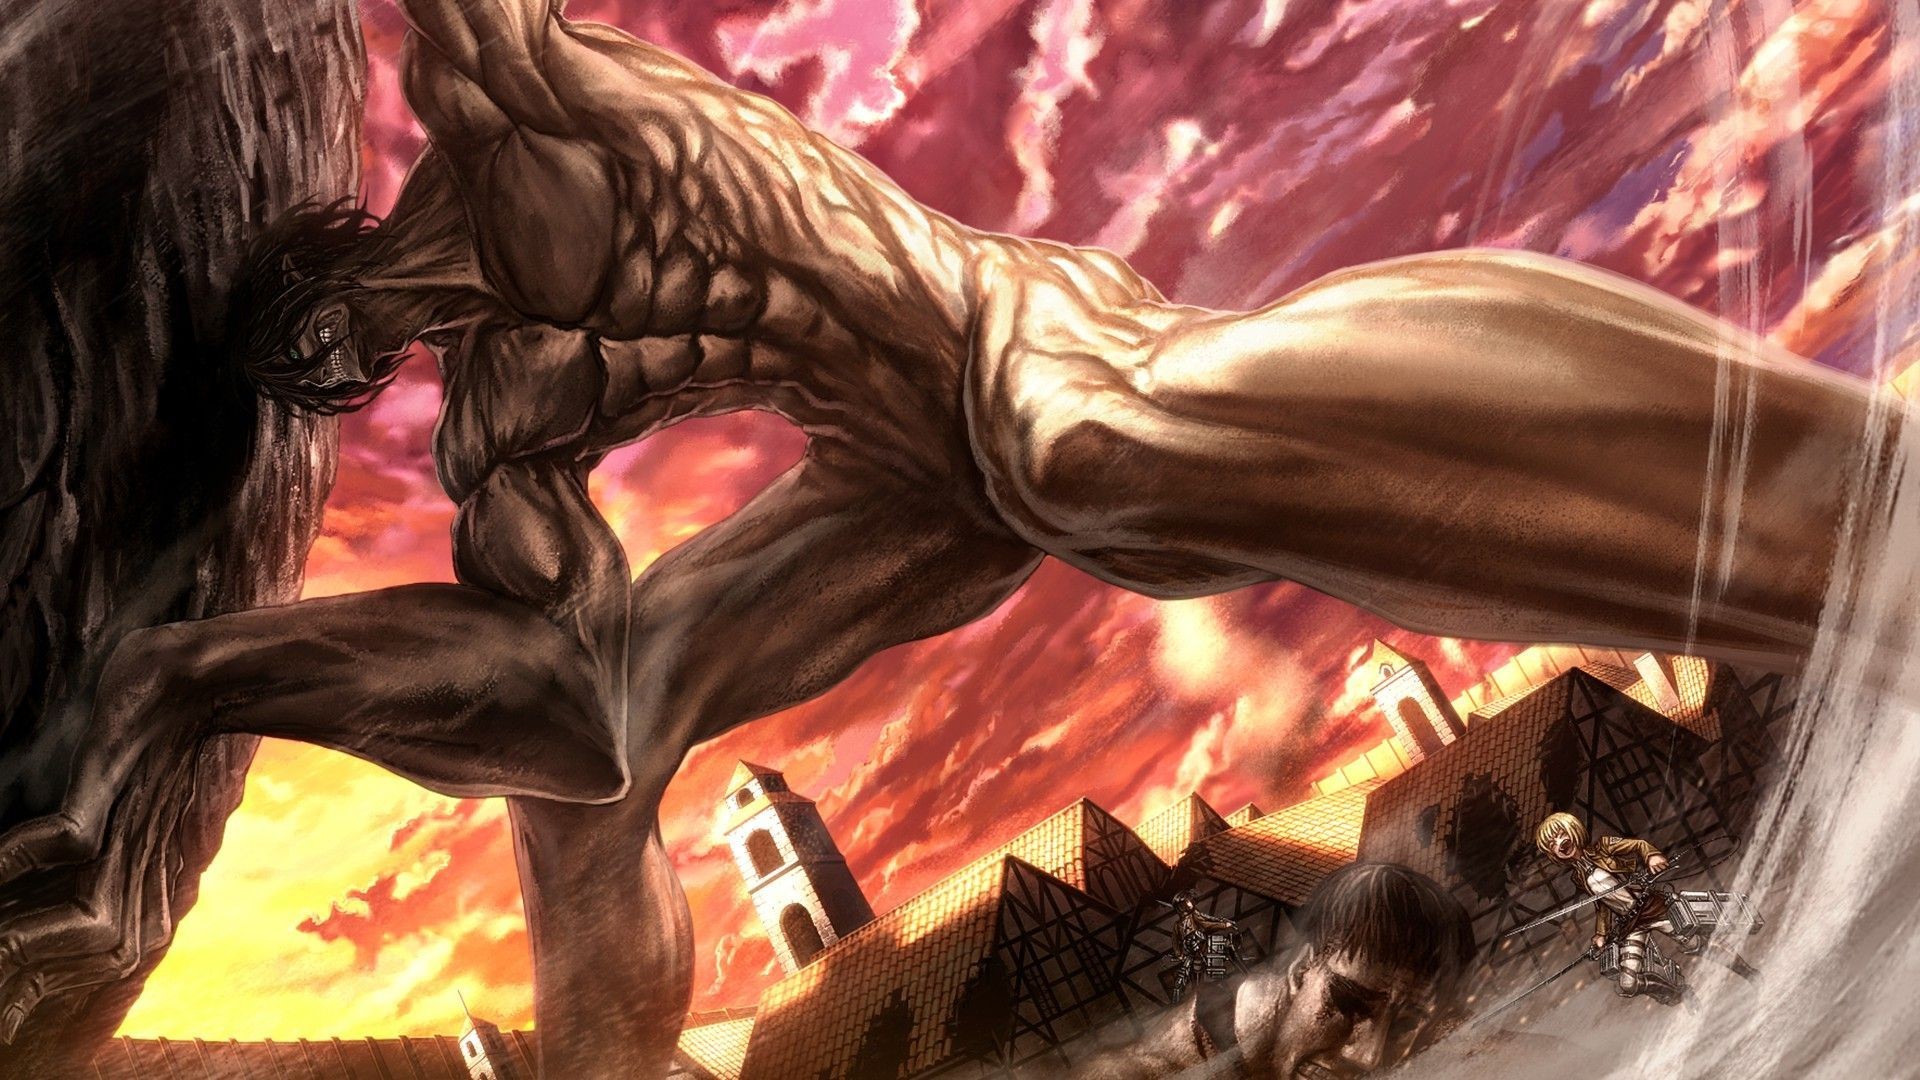 1920x1080 Attack on titan wallpapers